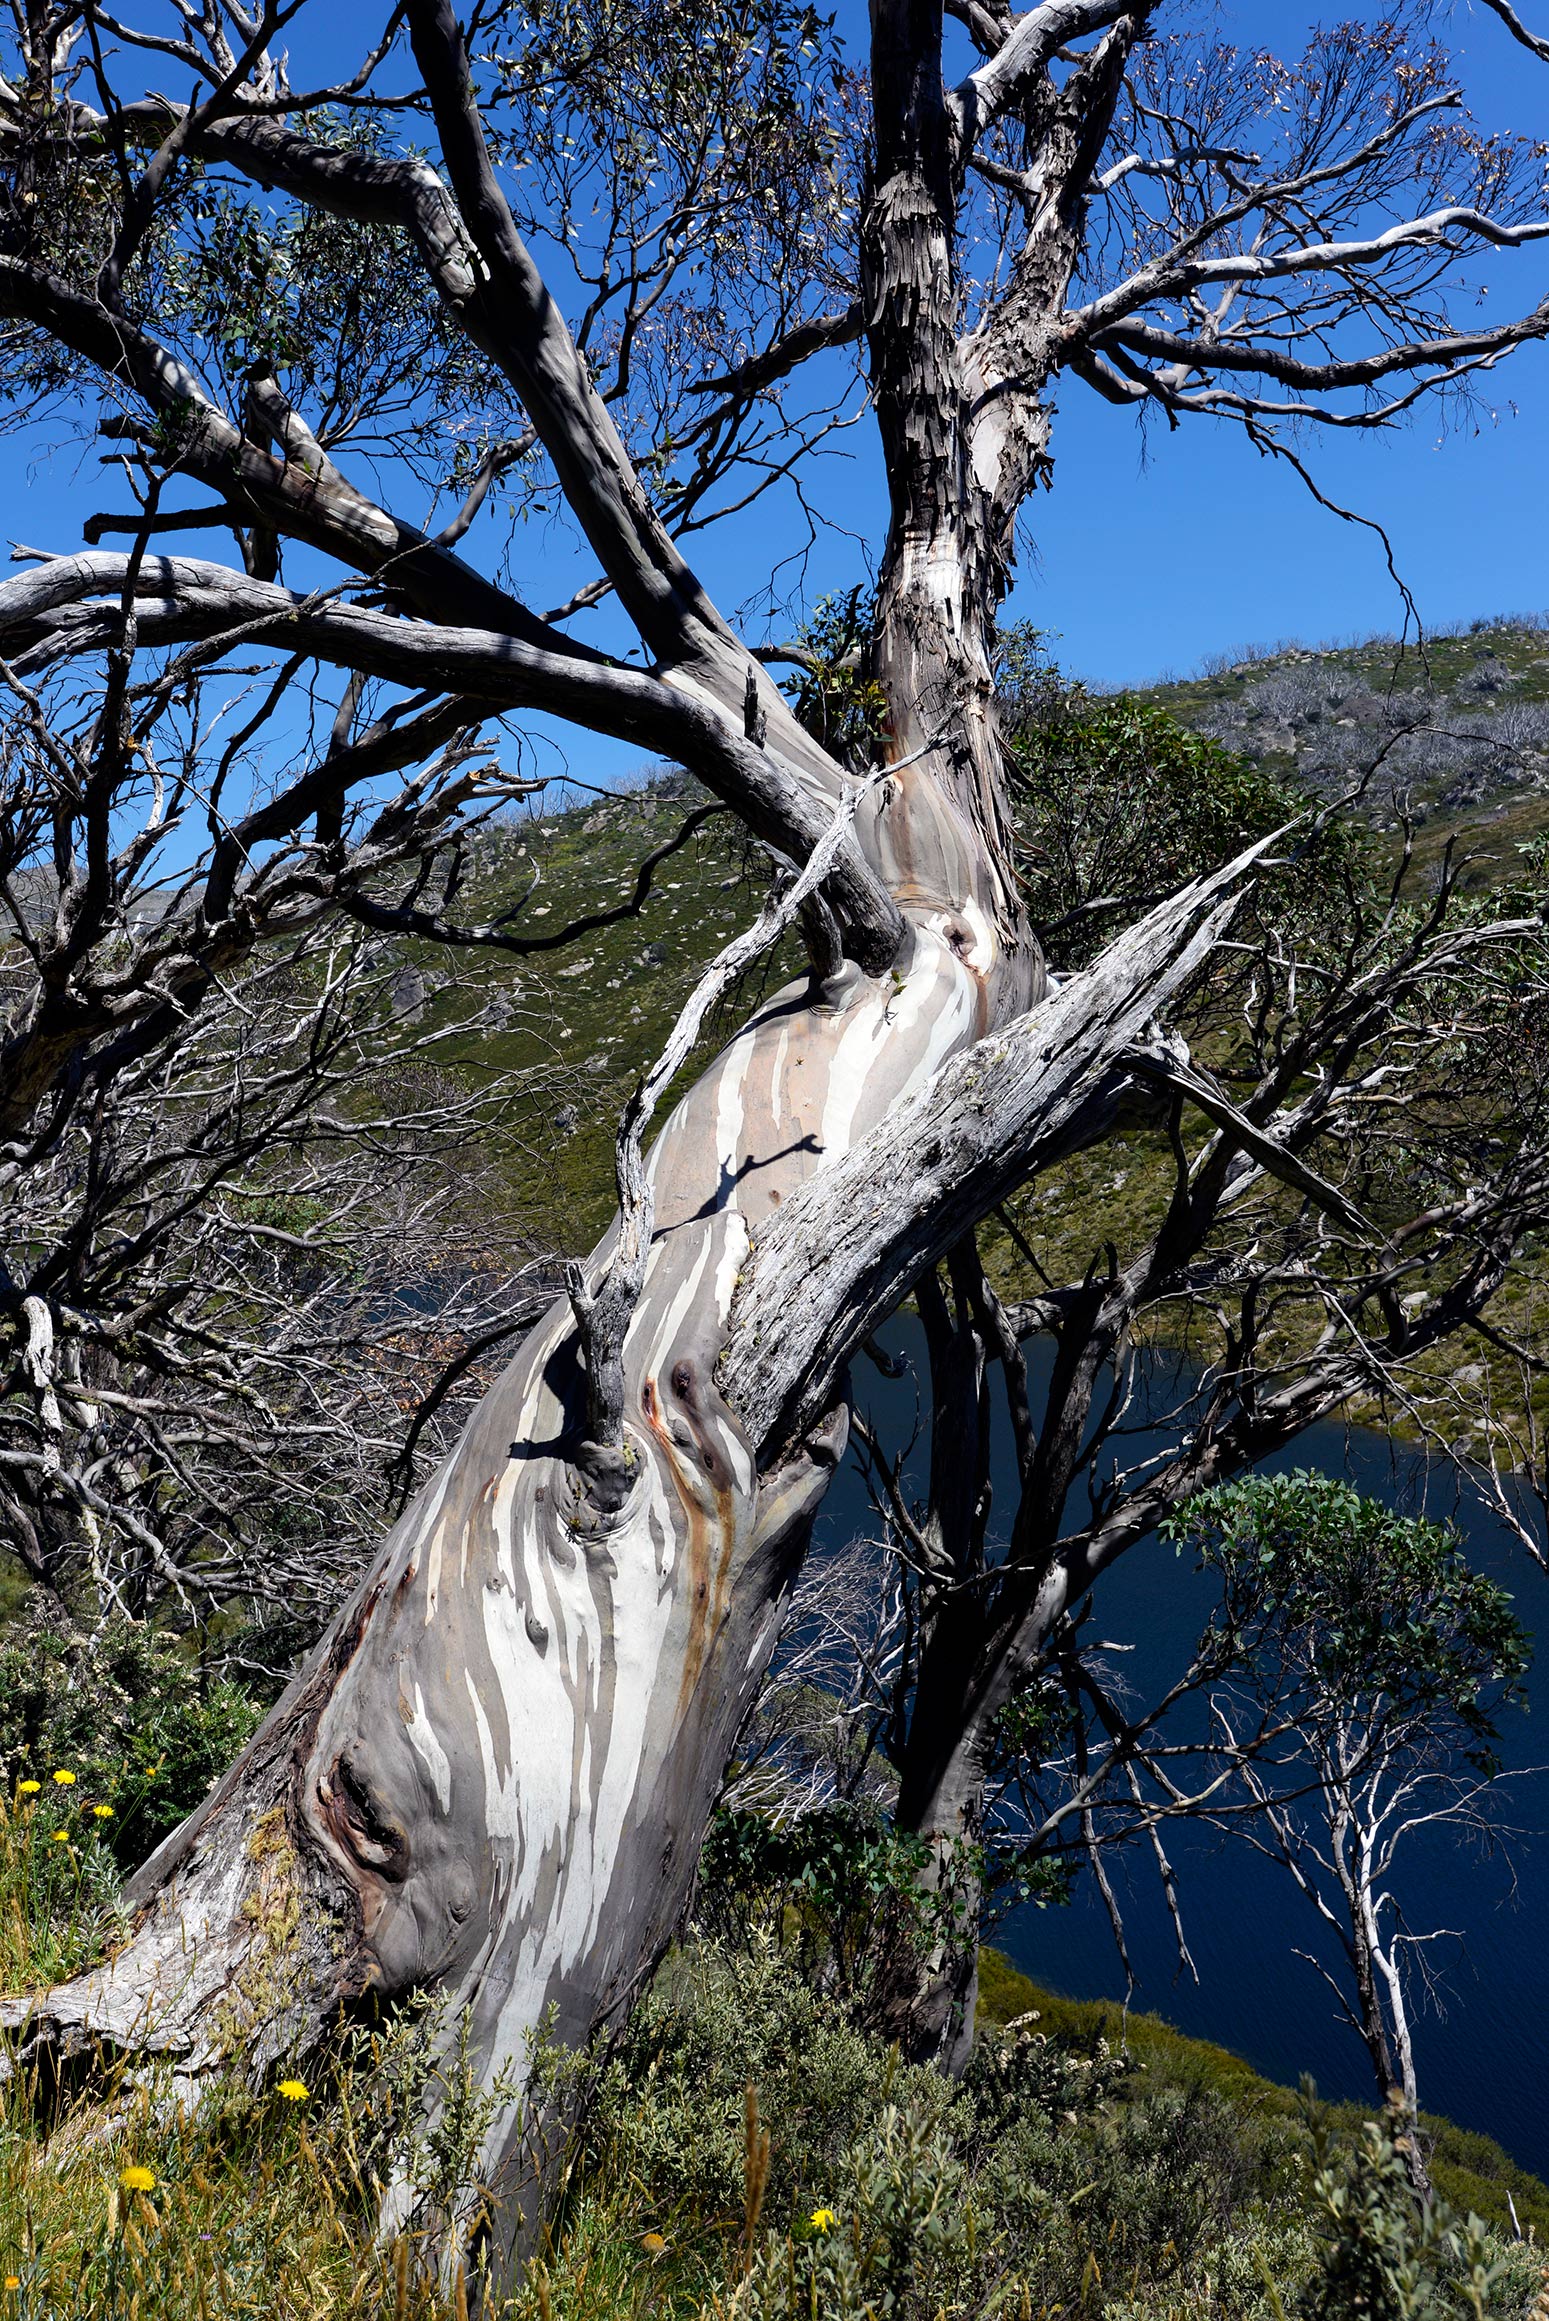 A gnarled snow gum. This tree has survived many winters. It was likely growing well before the dam was built.